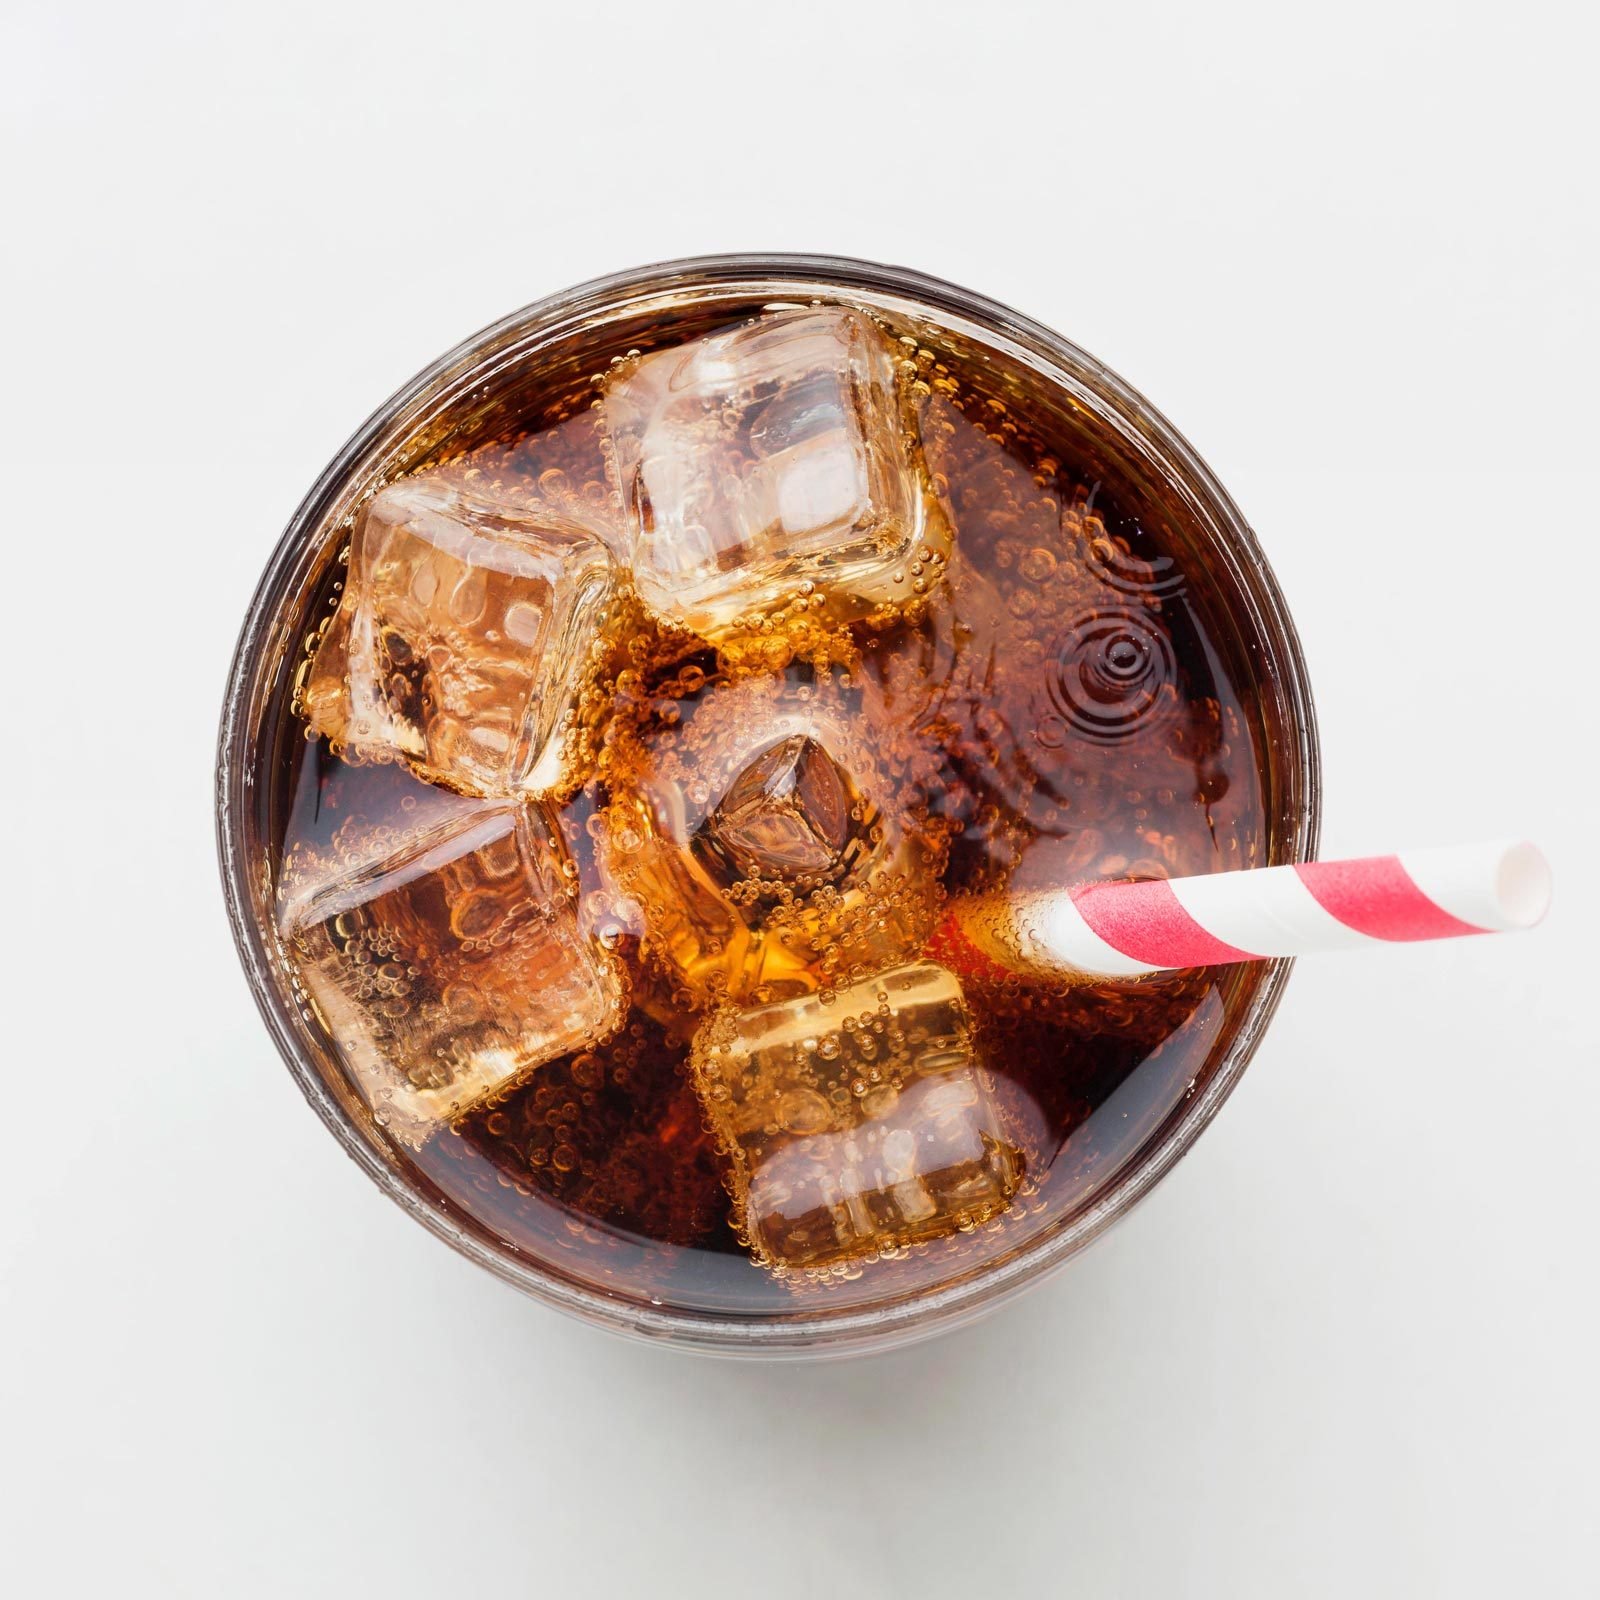 I Drank Diet Soda Every Day for a Week—Here's What Happened